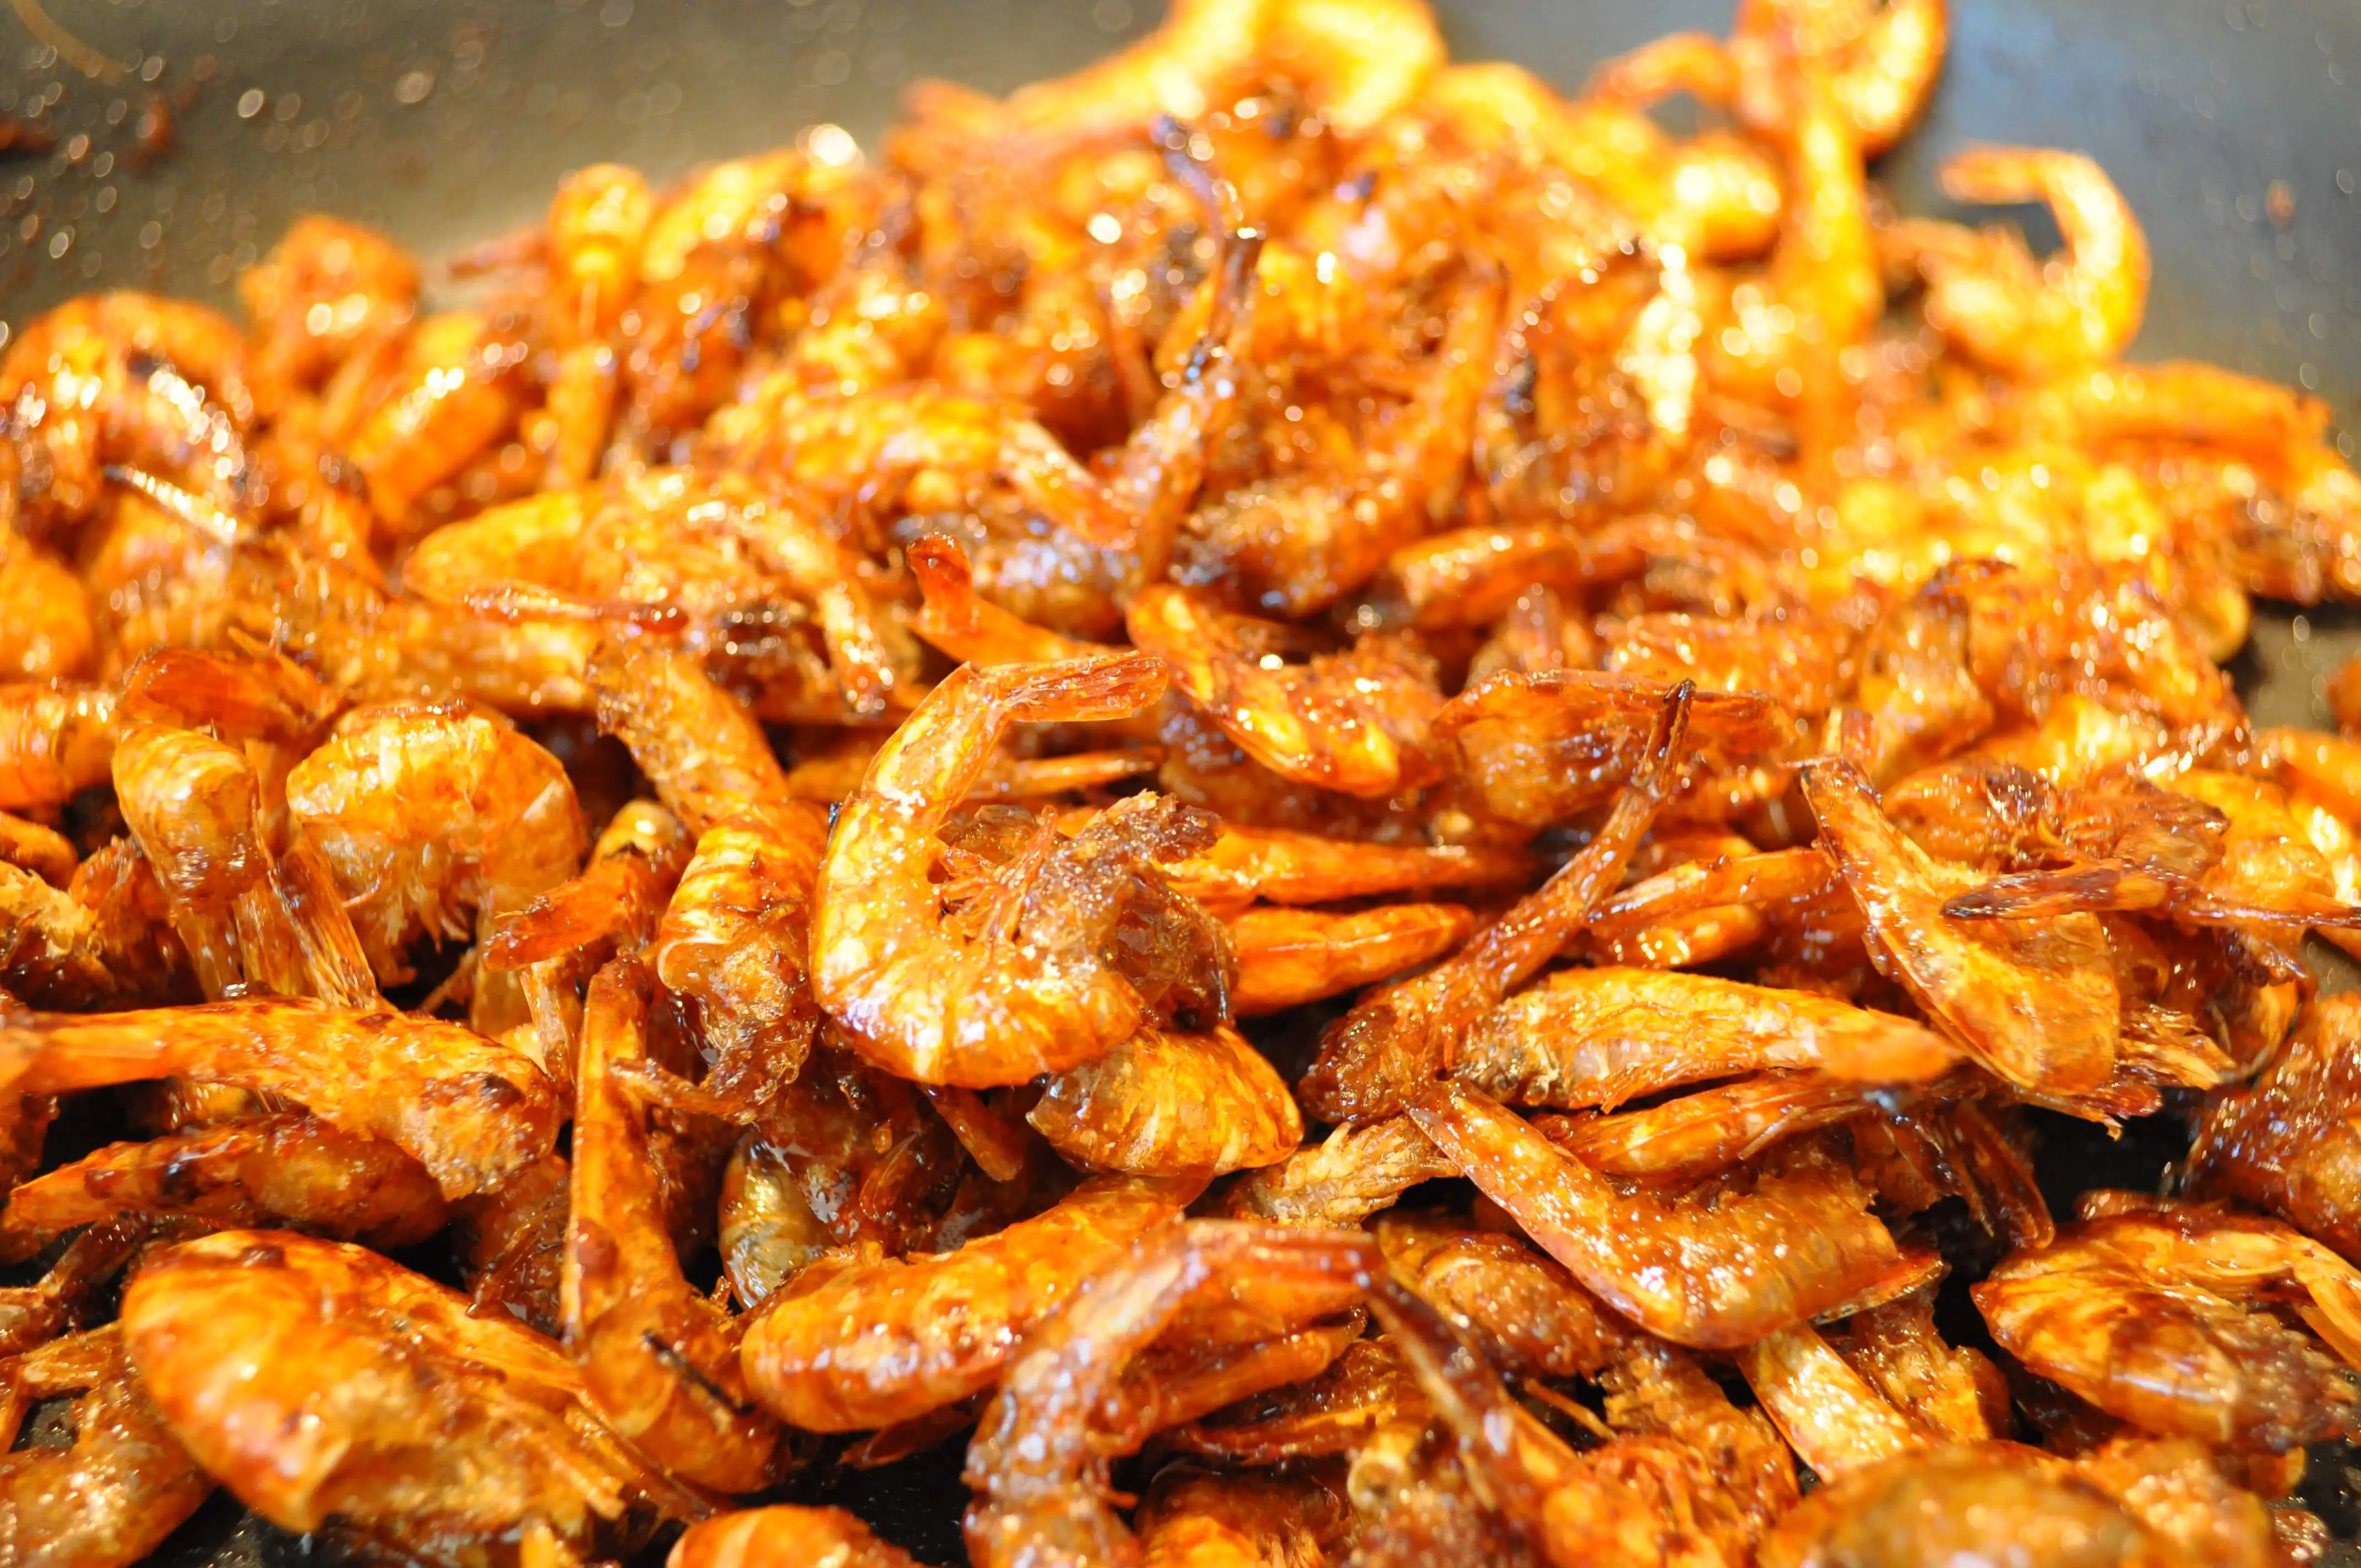 Dried shrimp cooked